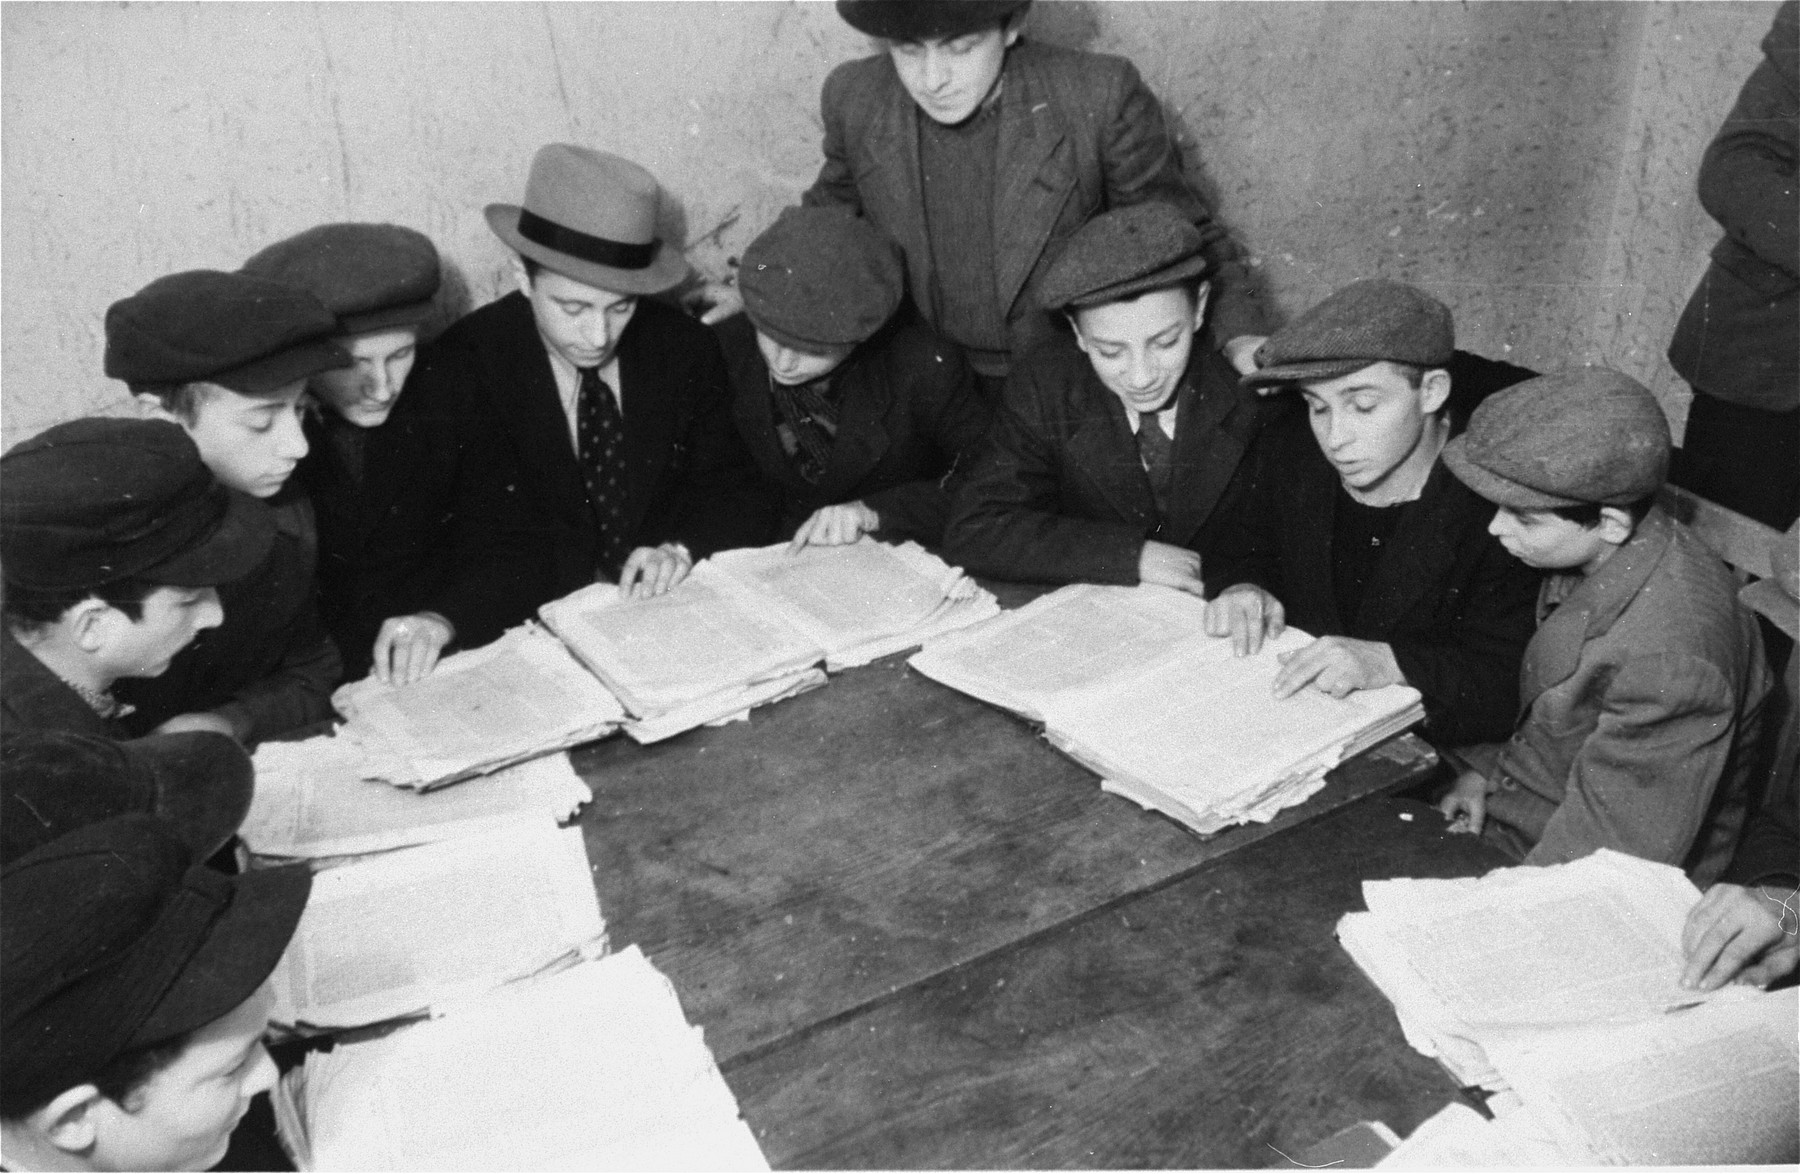 Students study Talmud at a Yeshiva in the Zeilsheim displaced person's camp.